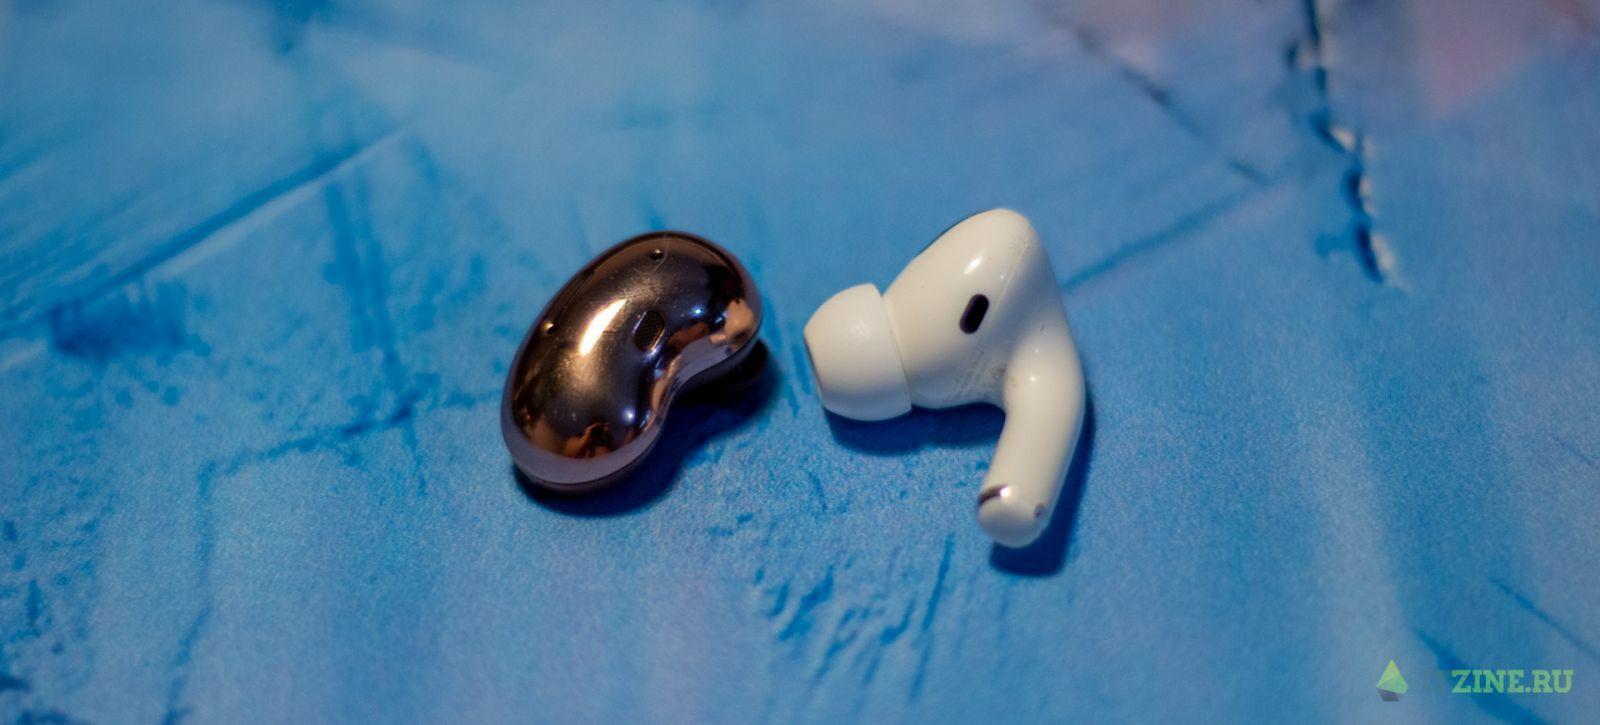 Samsung Galaxy Buds Live and Apple AirPods Pro Samsung Galaxy Buds Live headphone review: beans in ears